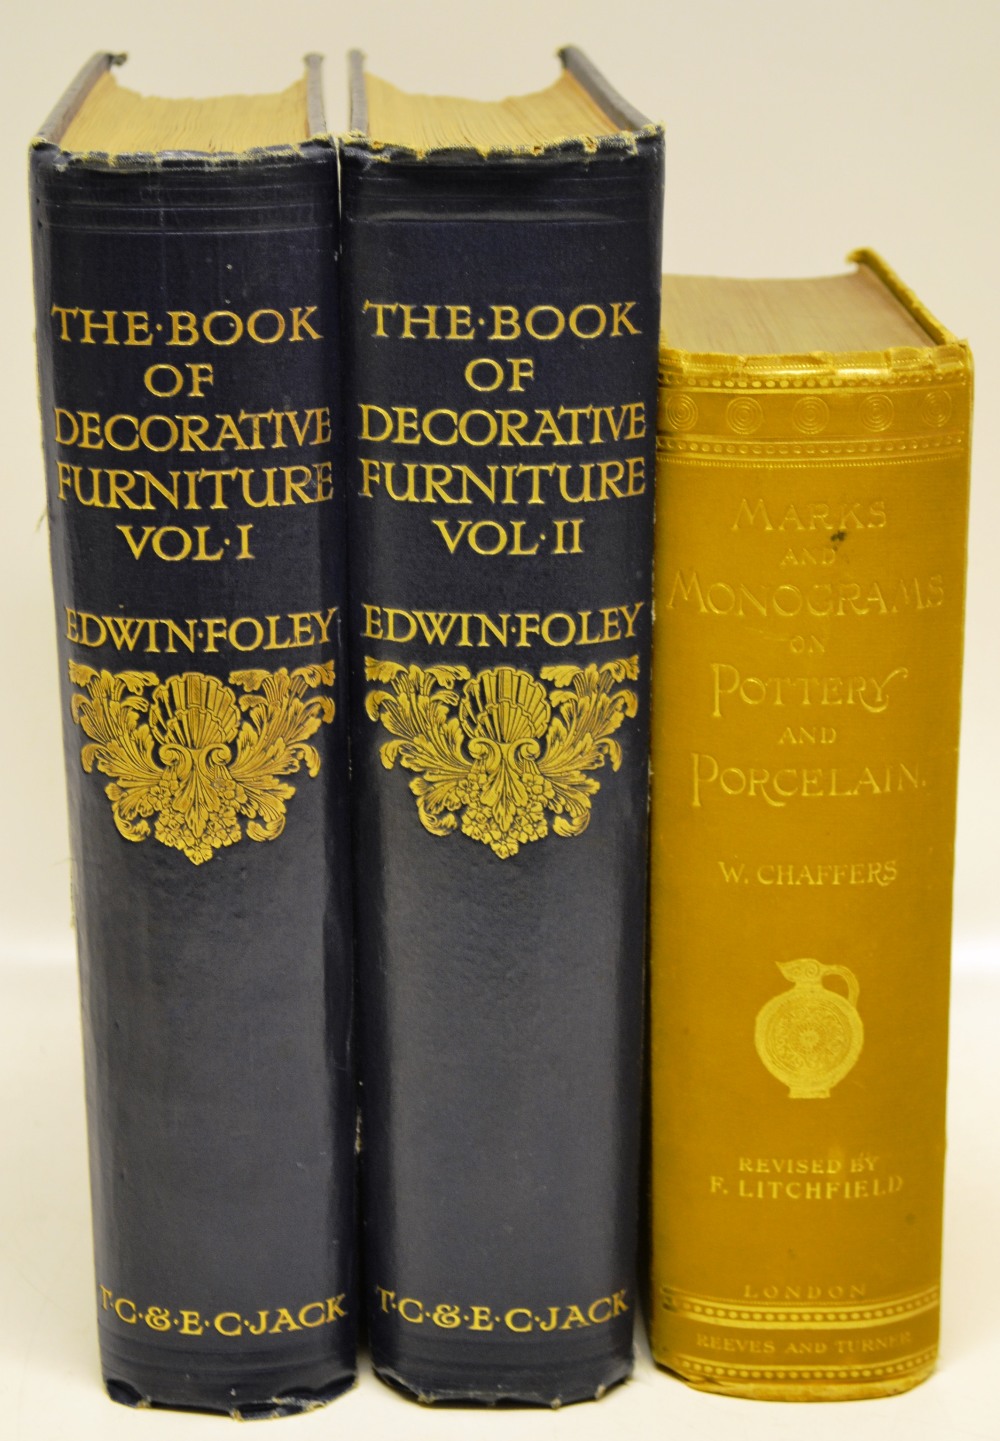 A Foley Edwin, The Book of Decorative Furniture in two volumes. Published by TC & EC Jack, 67